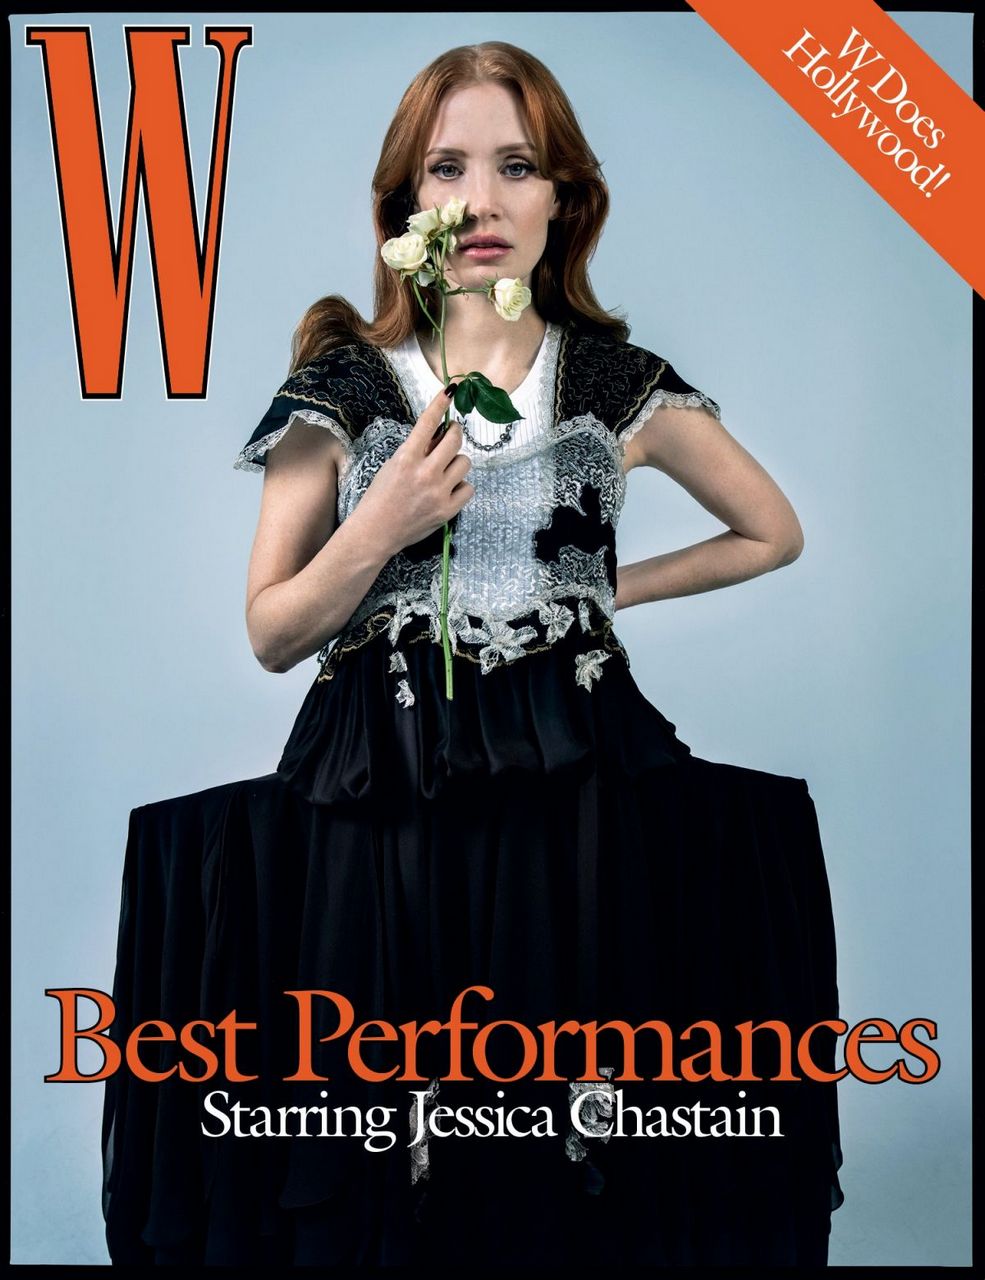 Jessica Chastain For W Magazine Best Performance Issue January